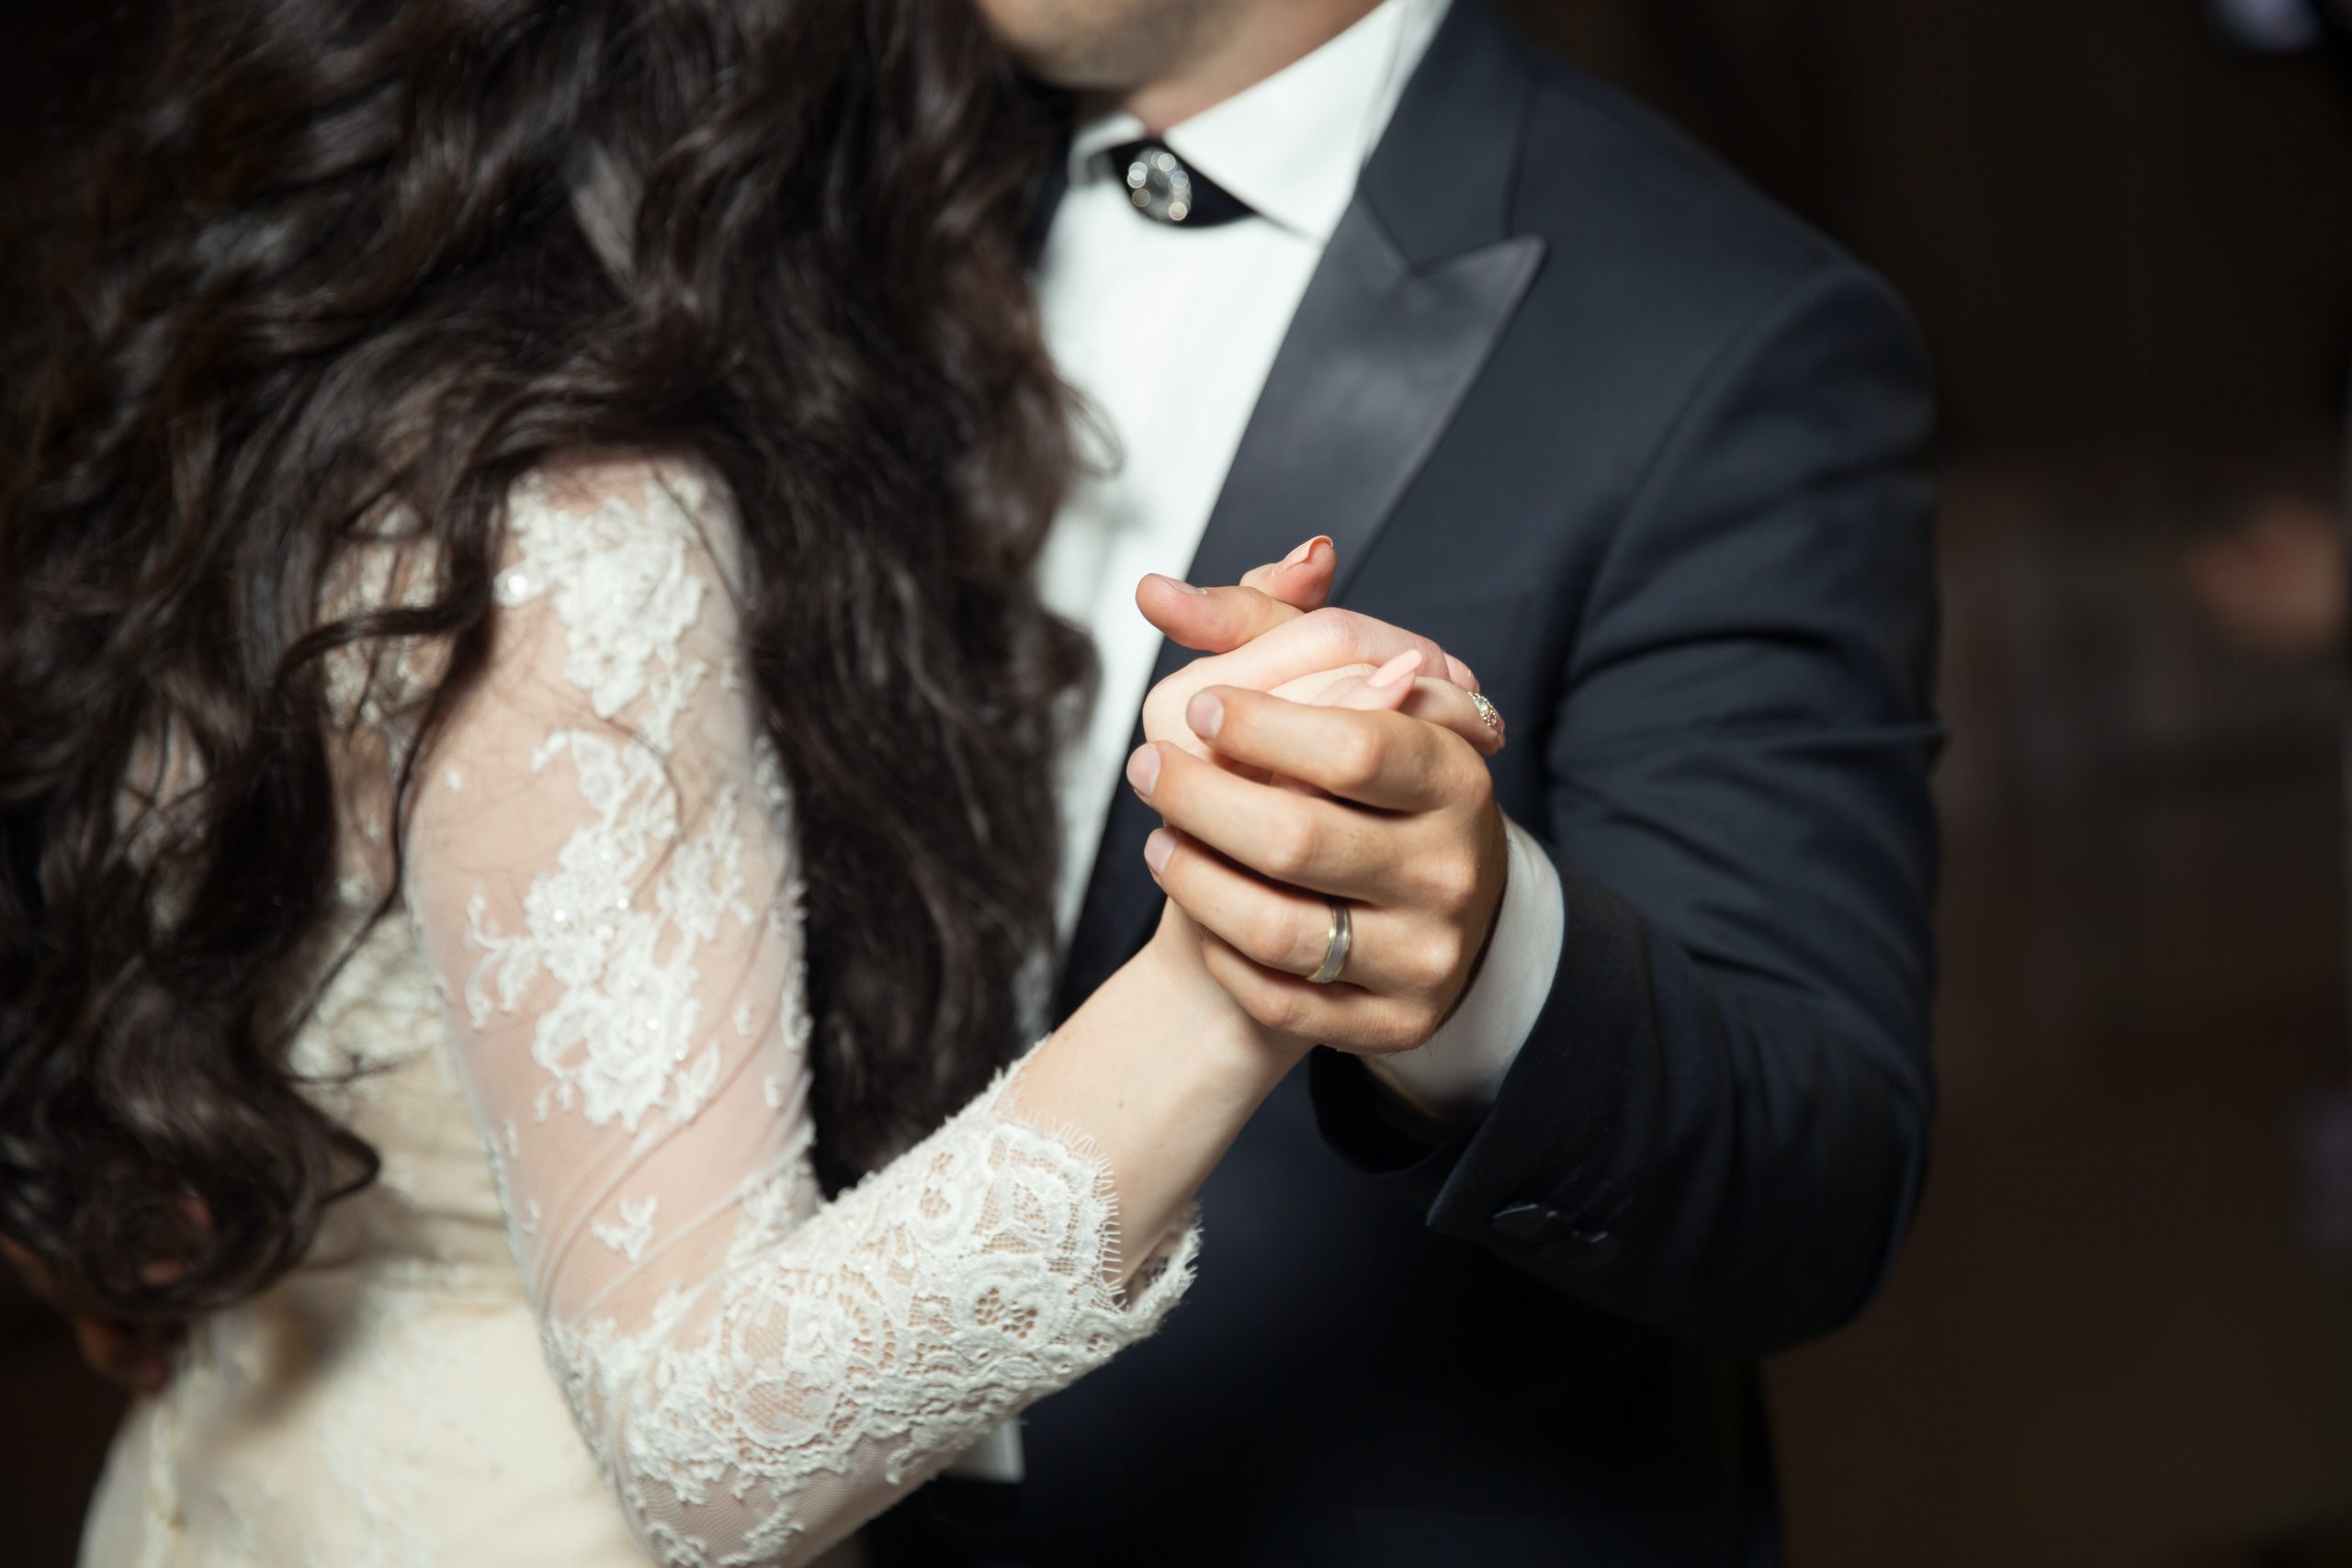 What to consider when choosing your first dance…